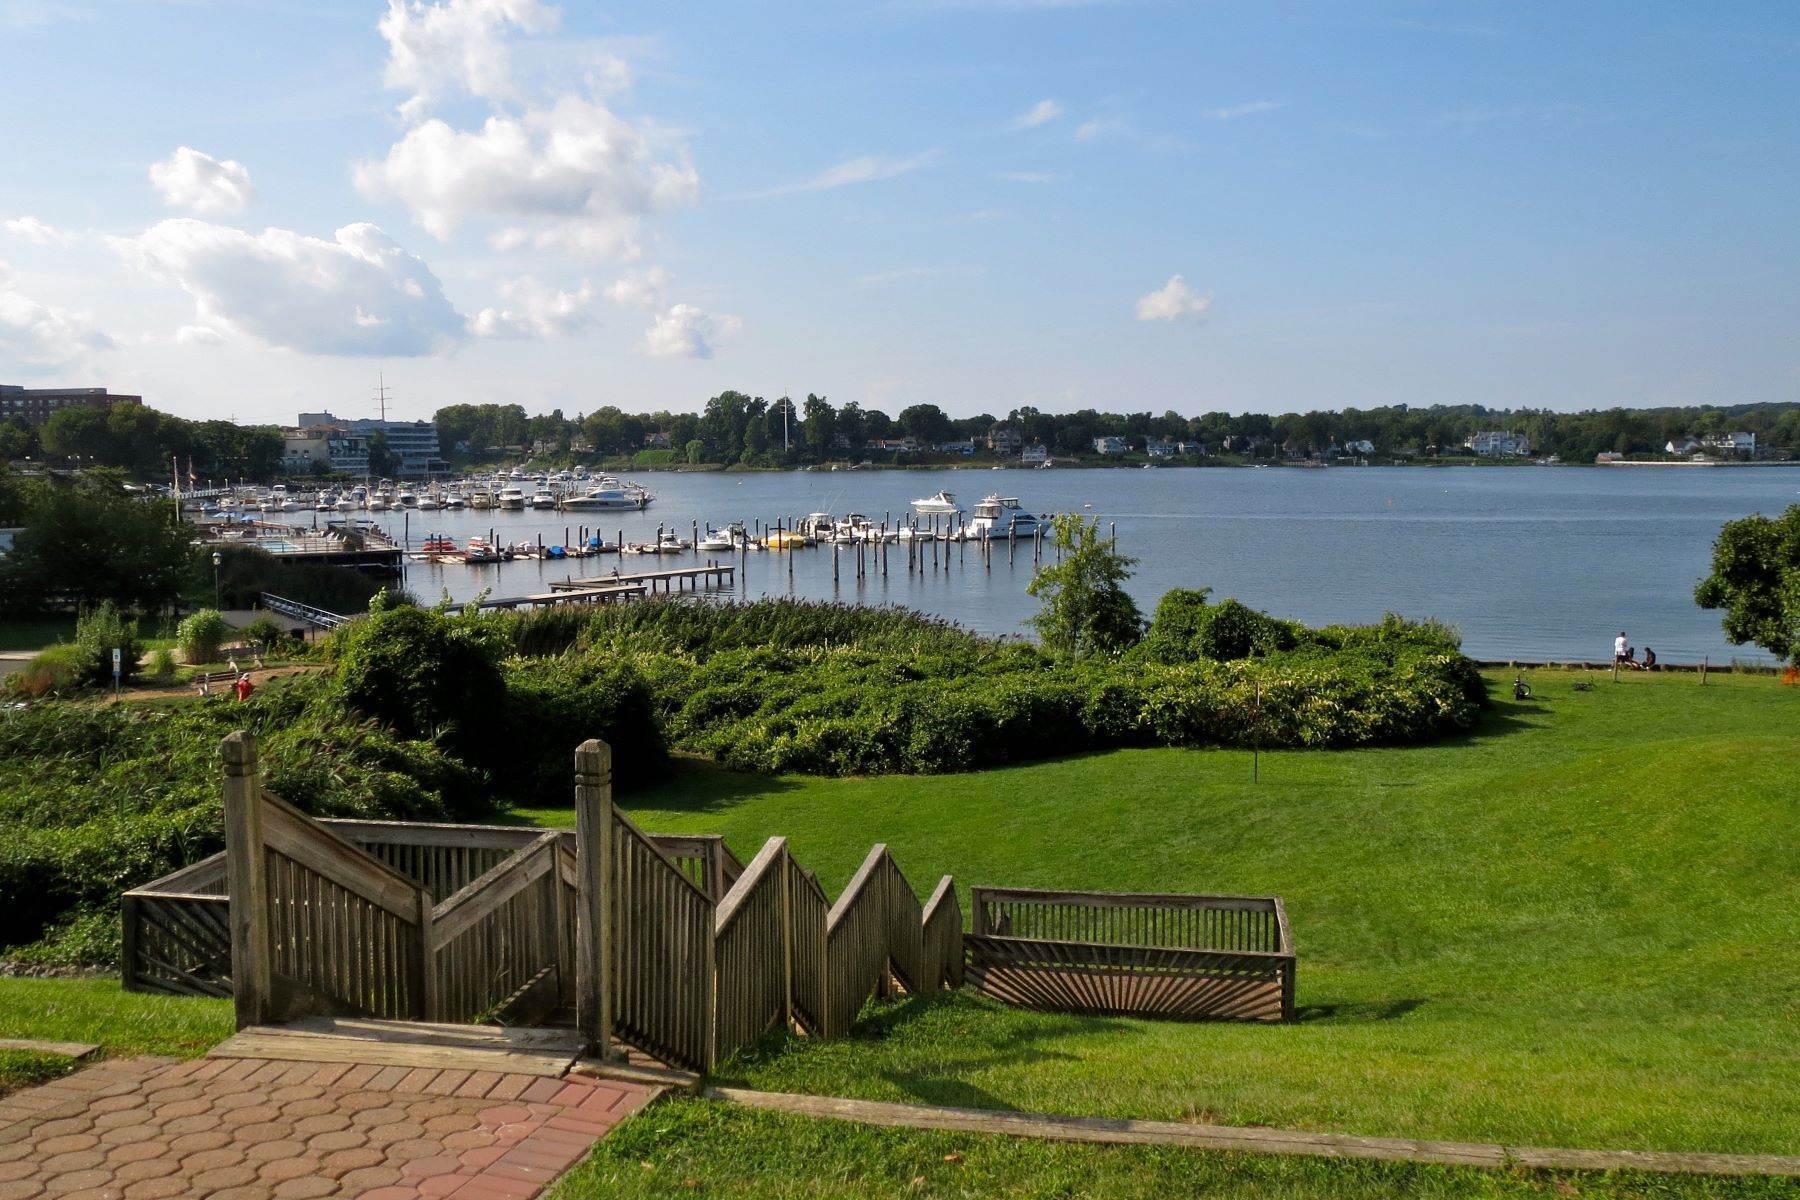 Property for Sale at Southbank At The Navesink 4 Boat Club Court PH 3A Red Bank, New Jersey 07701 United States